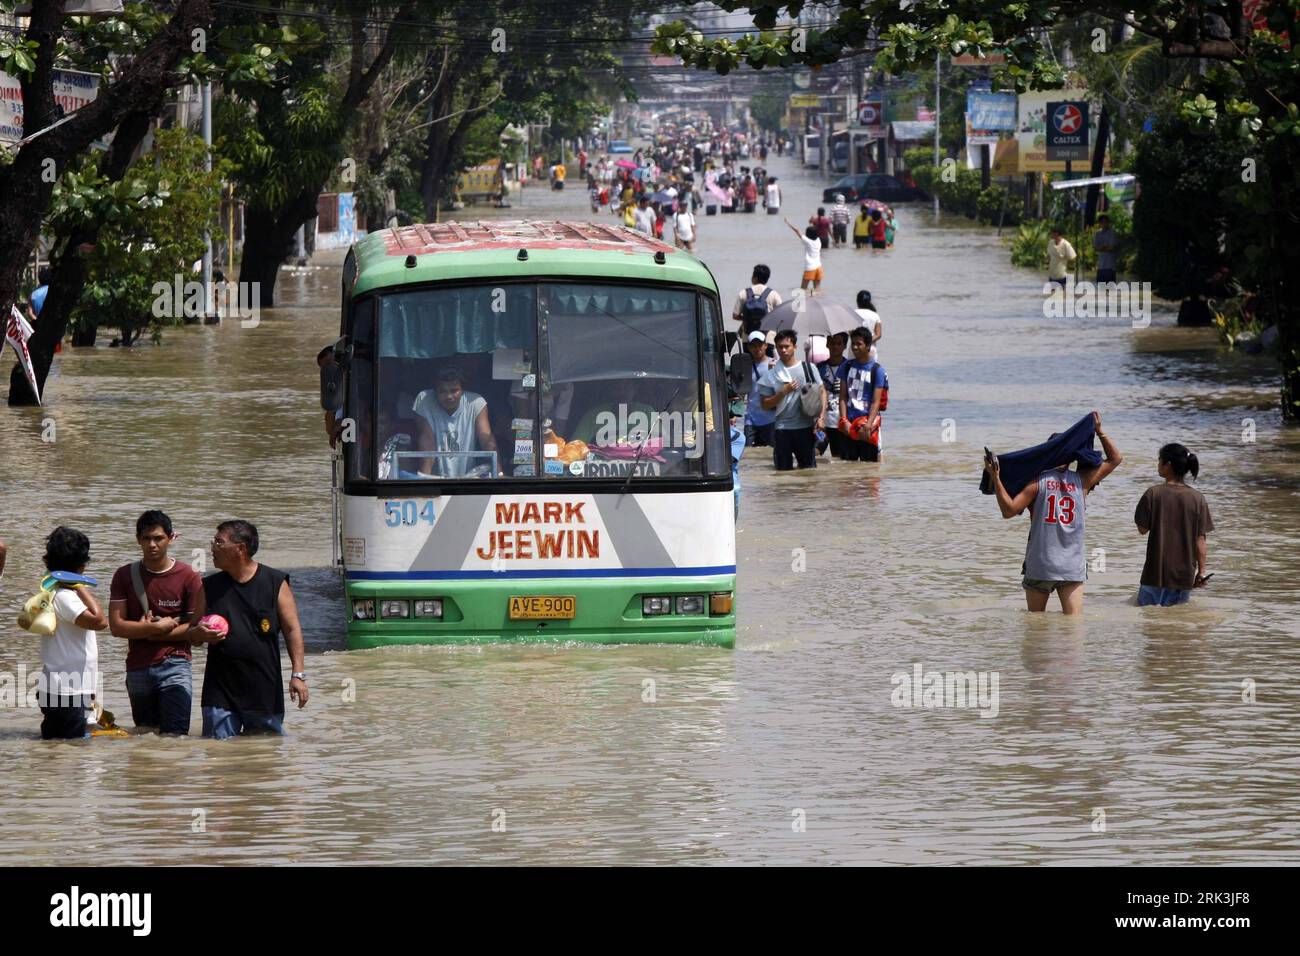 Bildnummer: 53522543  Datum: 10.10.2009  Copyright: imago/Xinhua (091010) -- MANILA, Oct. 10, 2009 (Xinhua) -- Filipinos wade in flooded street of Dagupan town, Pangasinan province, northern Philippines on 10 October 2009. The death toll in landslides and floods that hit the northern Philippines in the wake of typhoon Parma reached 299 as rescuers struggled through mud and raging waters in search of dozens of still missing, officials said. (Xinhua/Sybhel Cordero) (2)PHILIPPINES-MANILA-FLOOD PUBLICATIONxNOTxINxCHN Naturkatastrophen Überschwemmung Taifun Parma kbdig xsk 2009 quer o0 Straße Perso Stock Photo